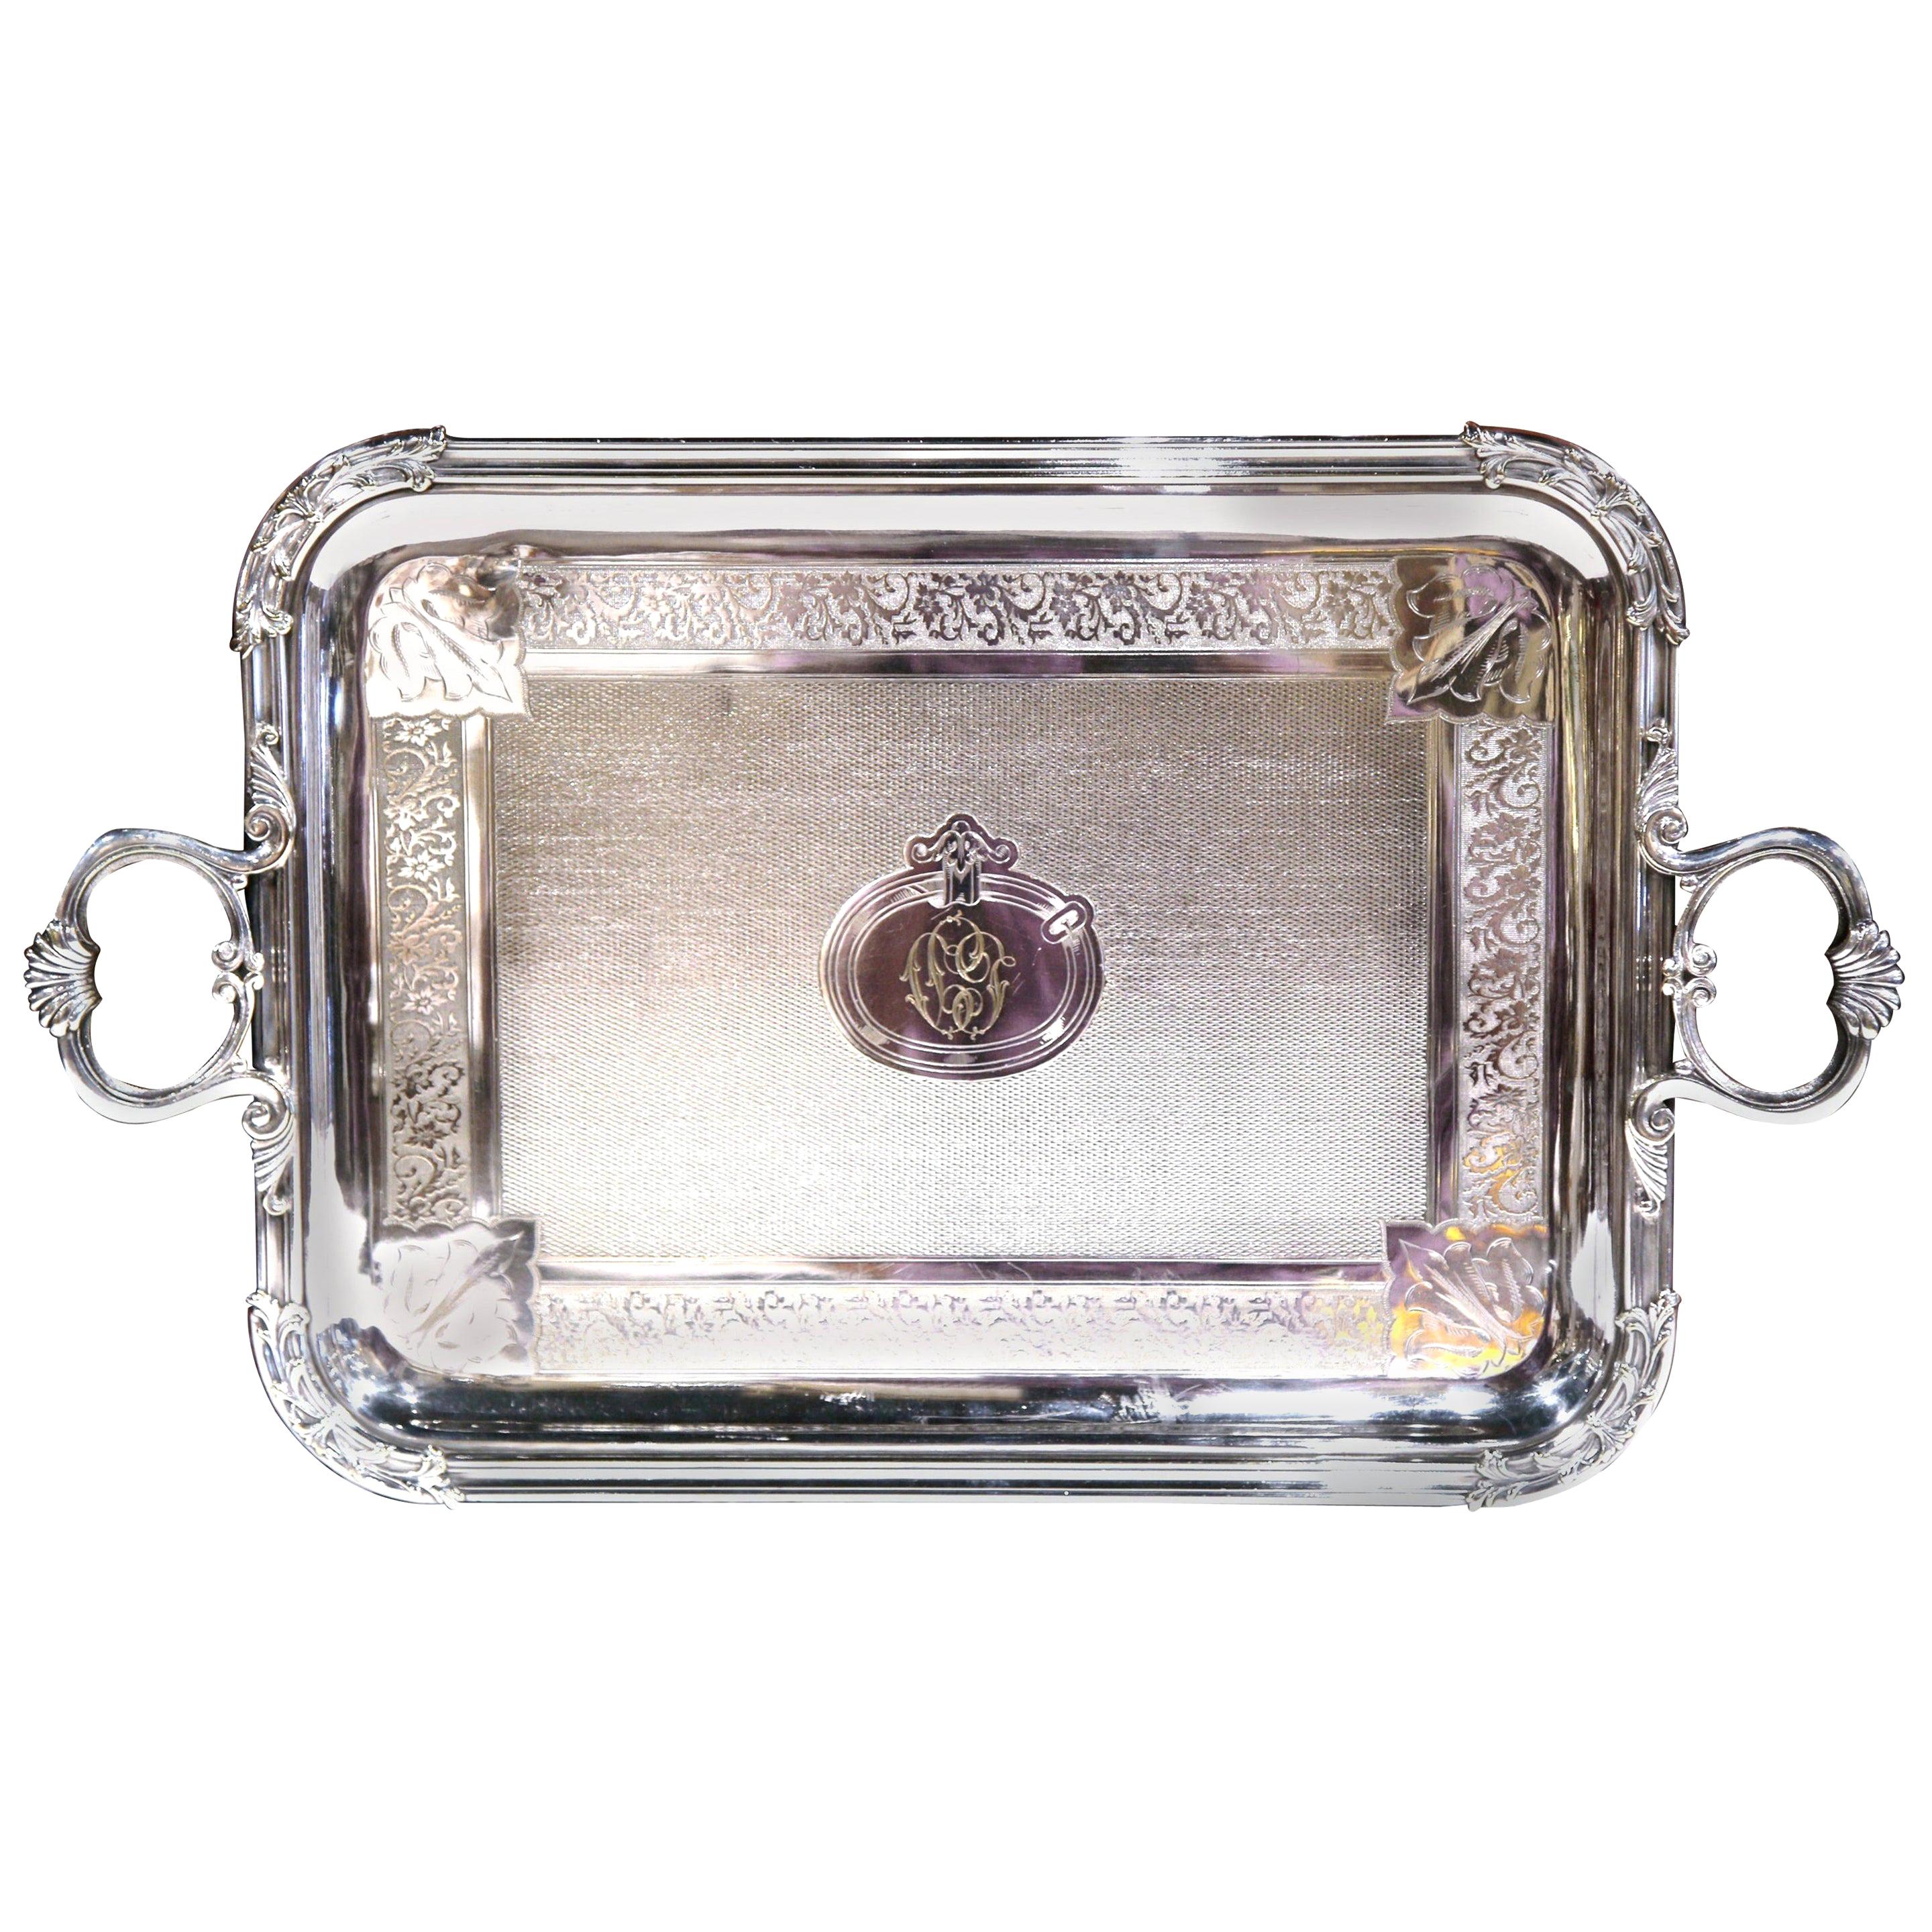 19th Century French Silver Plated Monogramed Tray Signed Pelloutier & Cie, 1894 For Sale